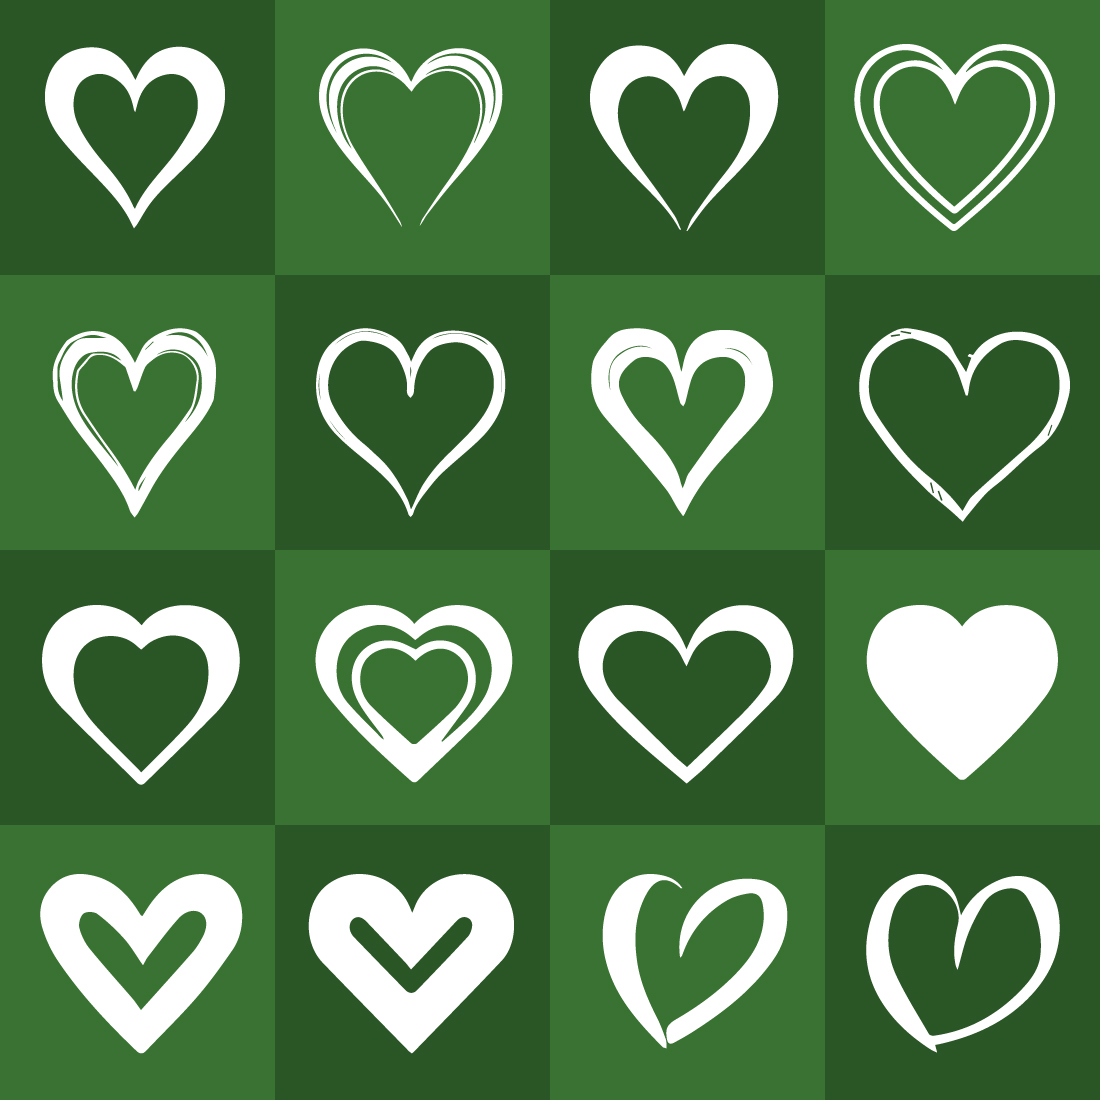 16 Heart shapes preview image.